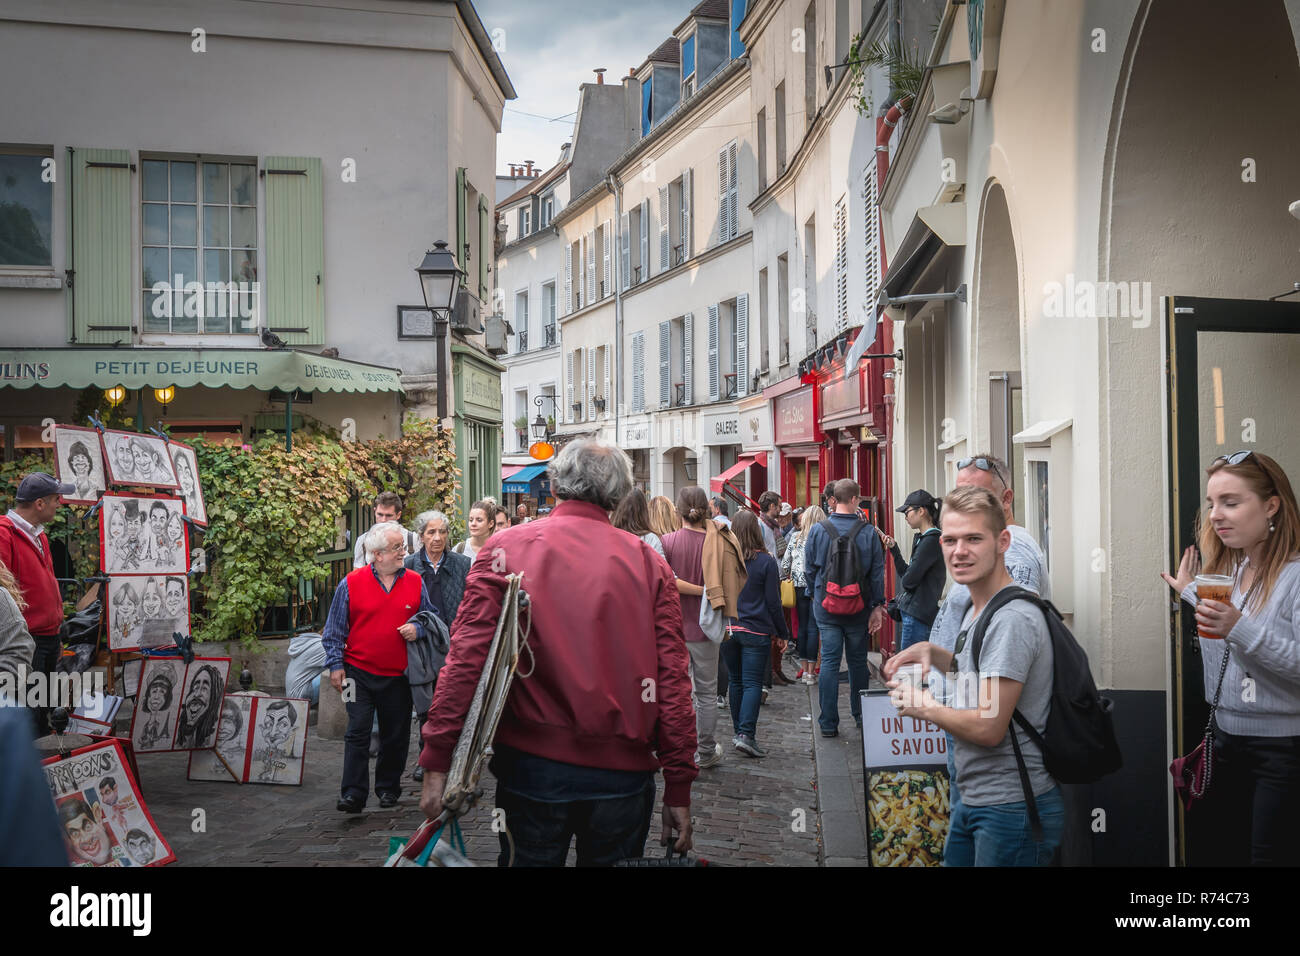 Paris, France - October 6, 2018: street atmosphere on the famous Place du Tertre in Montmartre where artists exhibit their work for curious passers-by Stock Photo